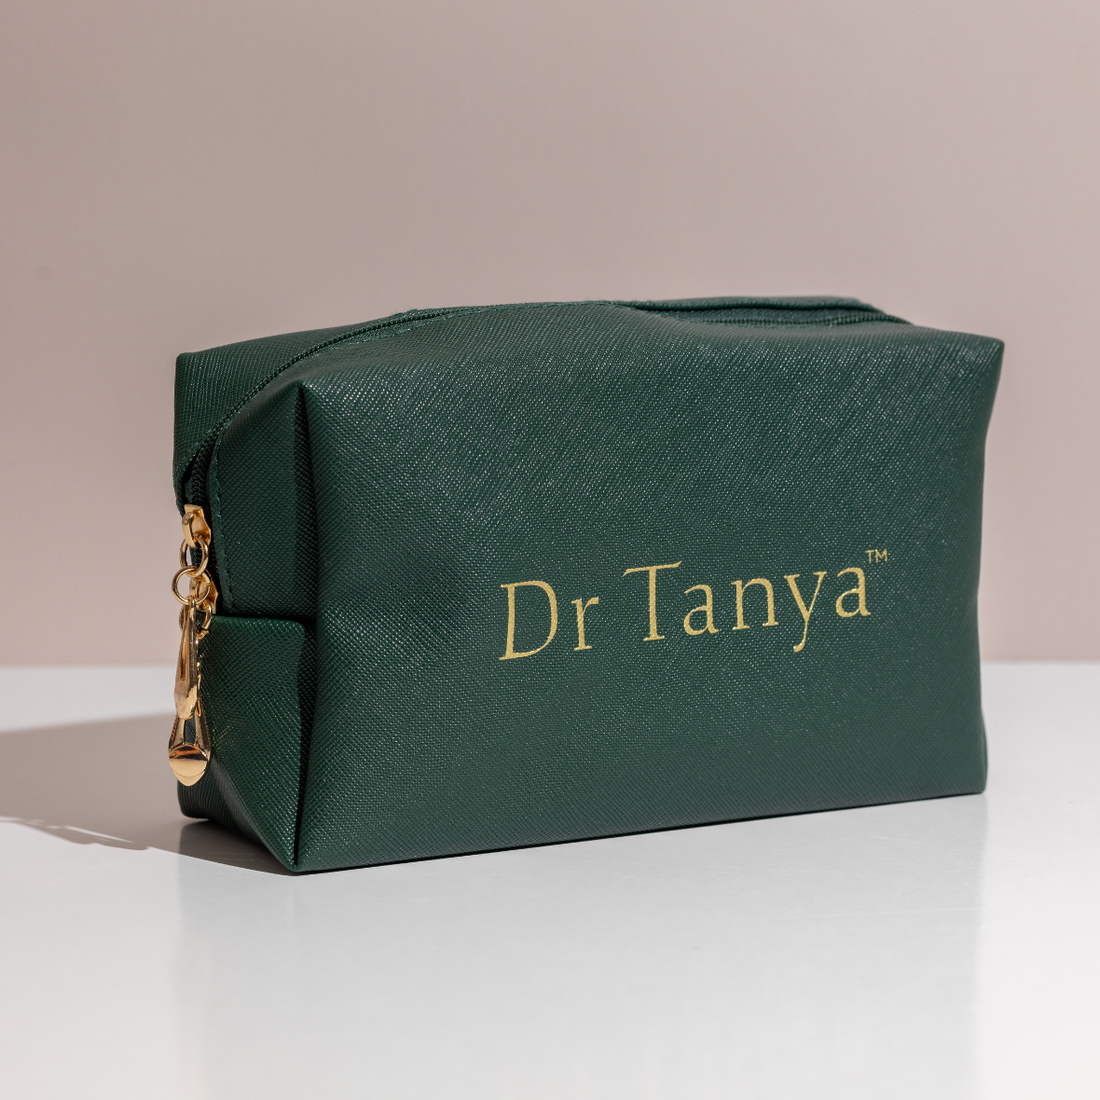 An emerald green toiletries bag with gold text saying Dr Tanya printed on the front